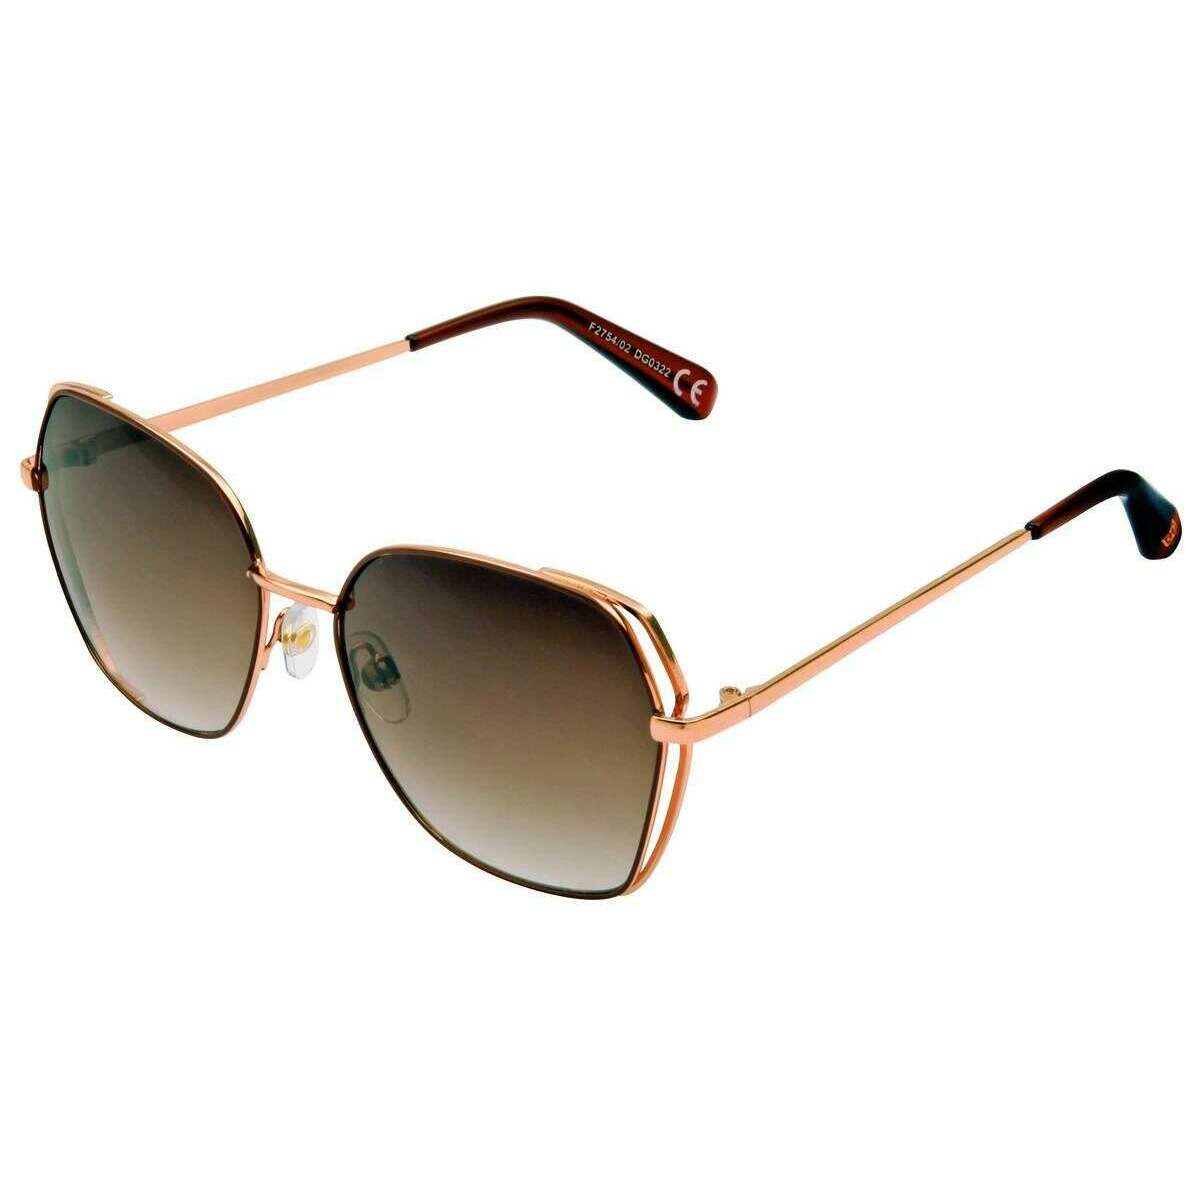 Foster Grant Glam Metal Round Sunglasses - Pale Shiny Gold